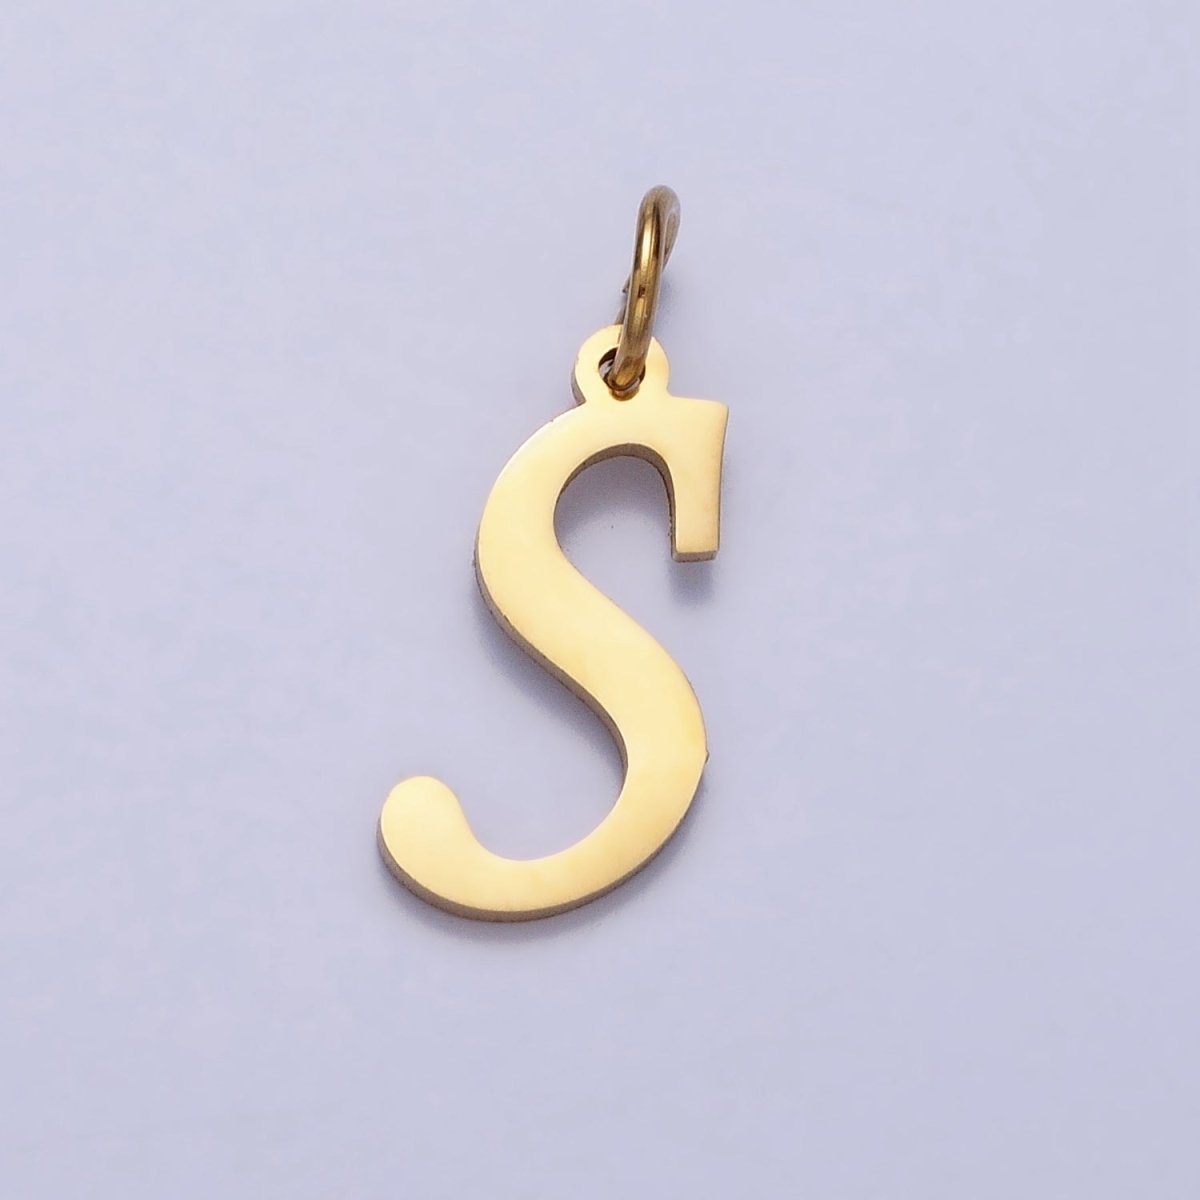 Small 24K Gold Plated Stainless Steel Letter Charms, initial alphabet pendant DIY jewelry letter charms for personalized jewelry making AD201 - AD226 - DLUXCA